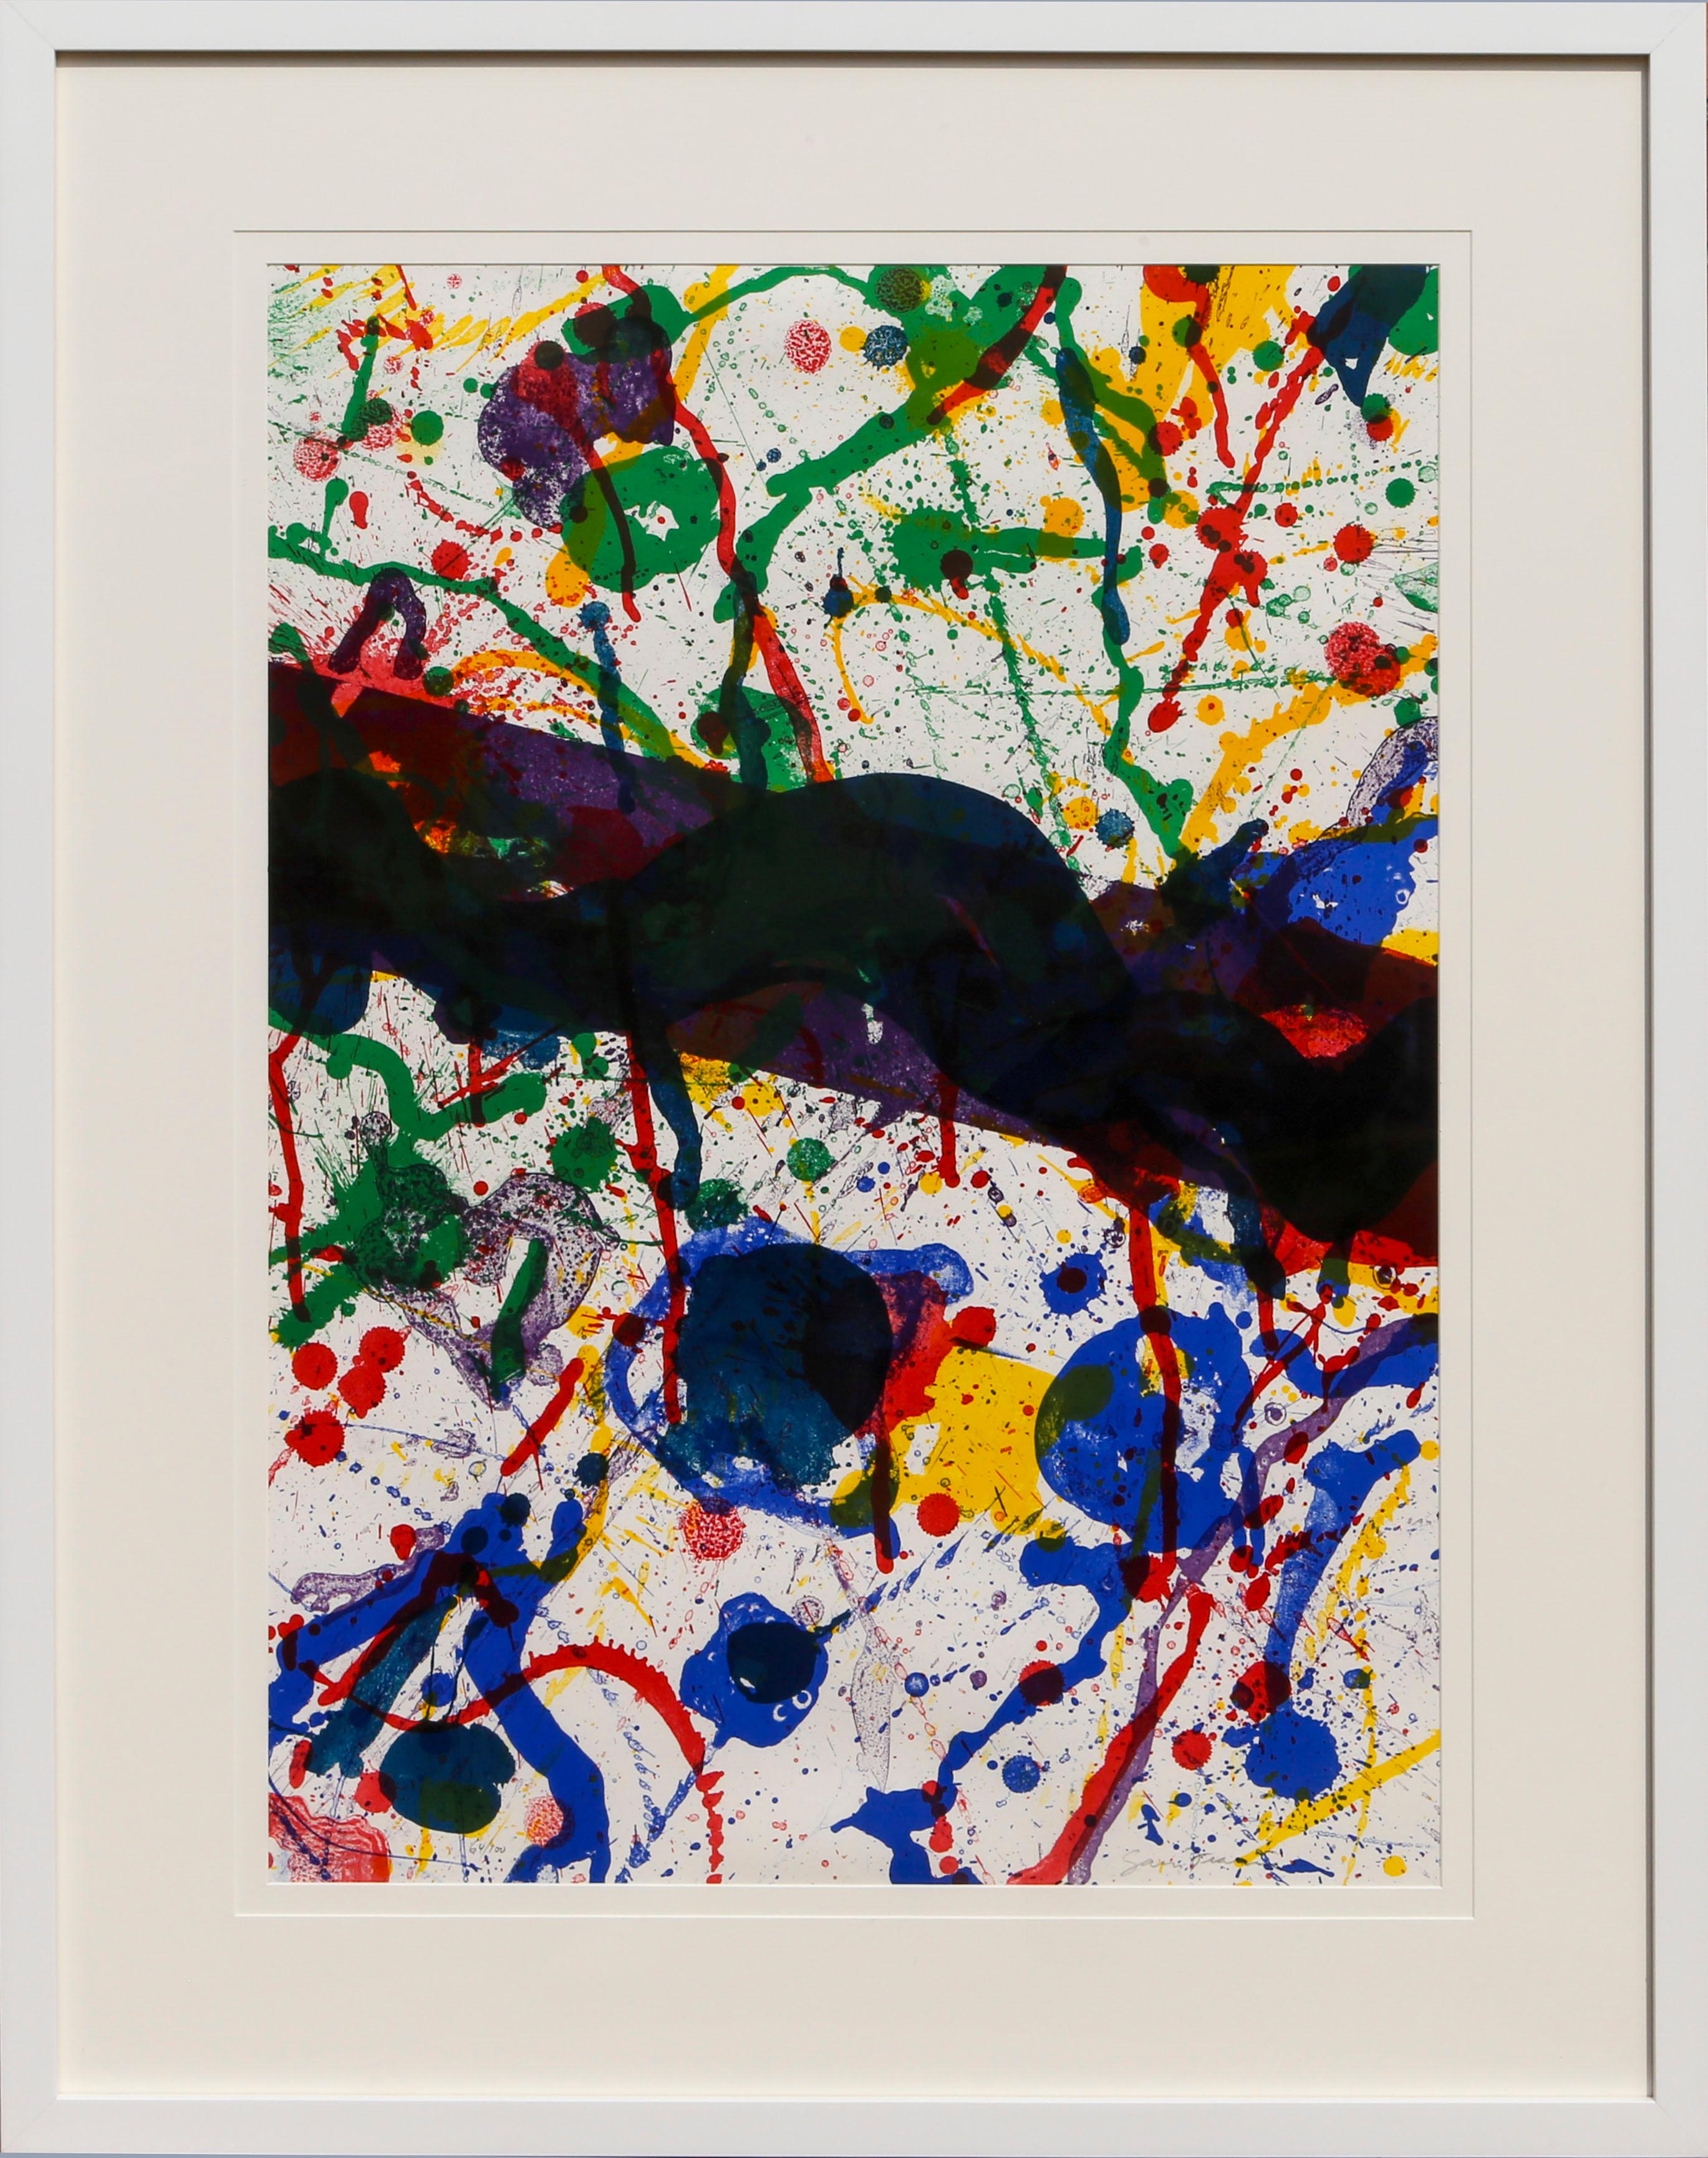 Untitled (SF-317)
Sam Francis, American (1923–1994)
Portfolio: Michael Waldberg: Sky Poems
Date: 1986
Lithograph on Rives BFK, signed and numbered in pencil
Edition of 64/100
Size: 29.88 x 22 in. (75.9 x 55.88 cm)
Frame Size: 39.5 x 31.5